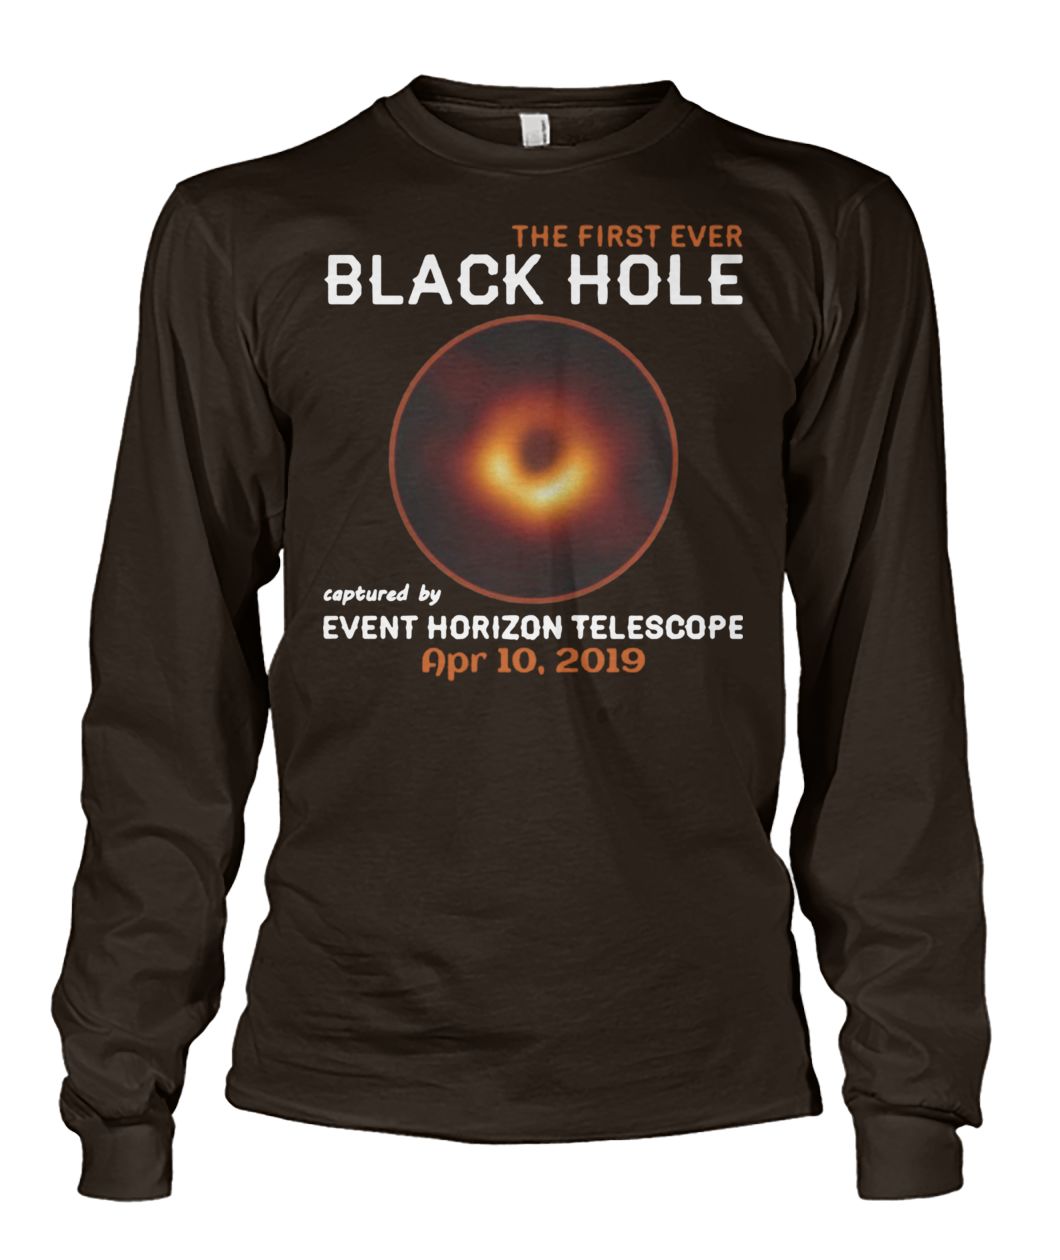 The first ever black hole captured by event horizon telescope april 10th 2019 unisex long sleeve